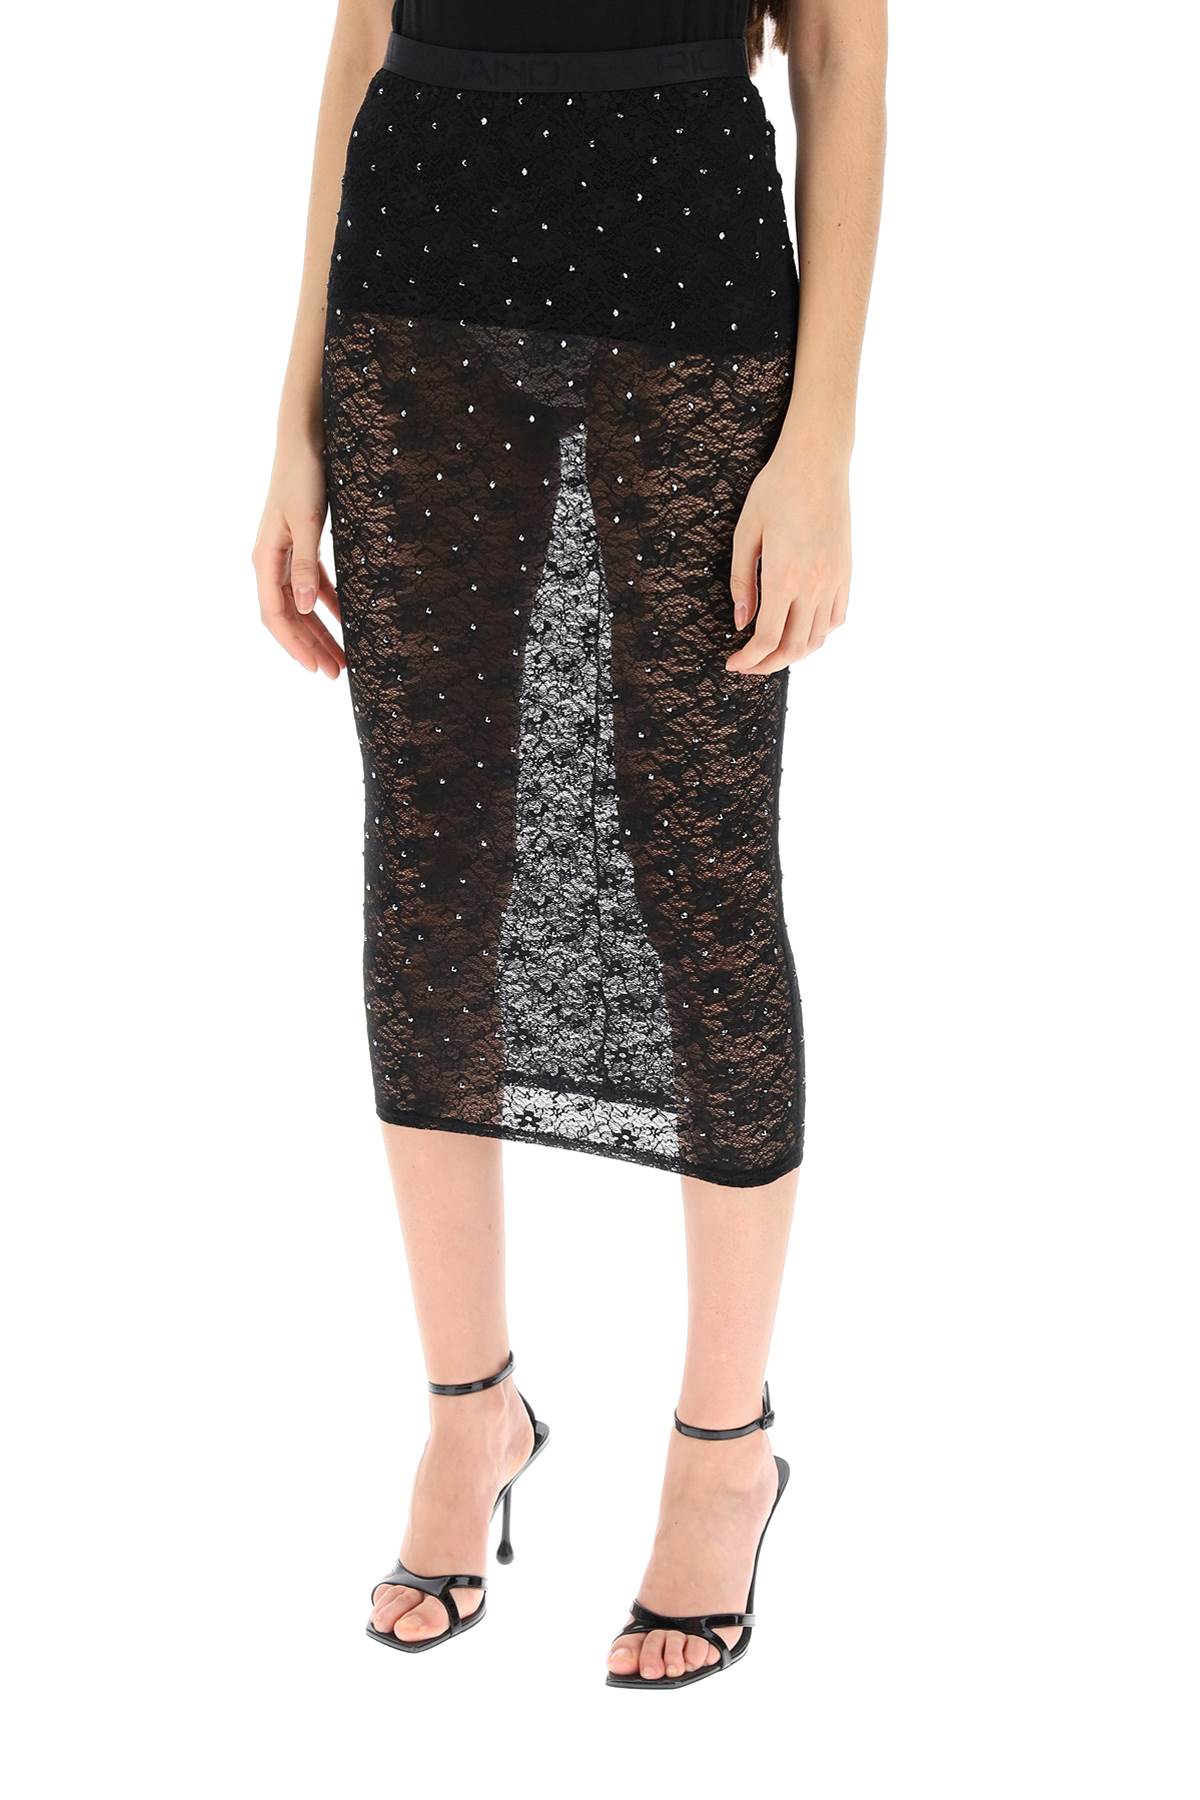 Alessandra rich midi skirt in lace with rhinestones-3